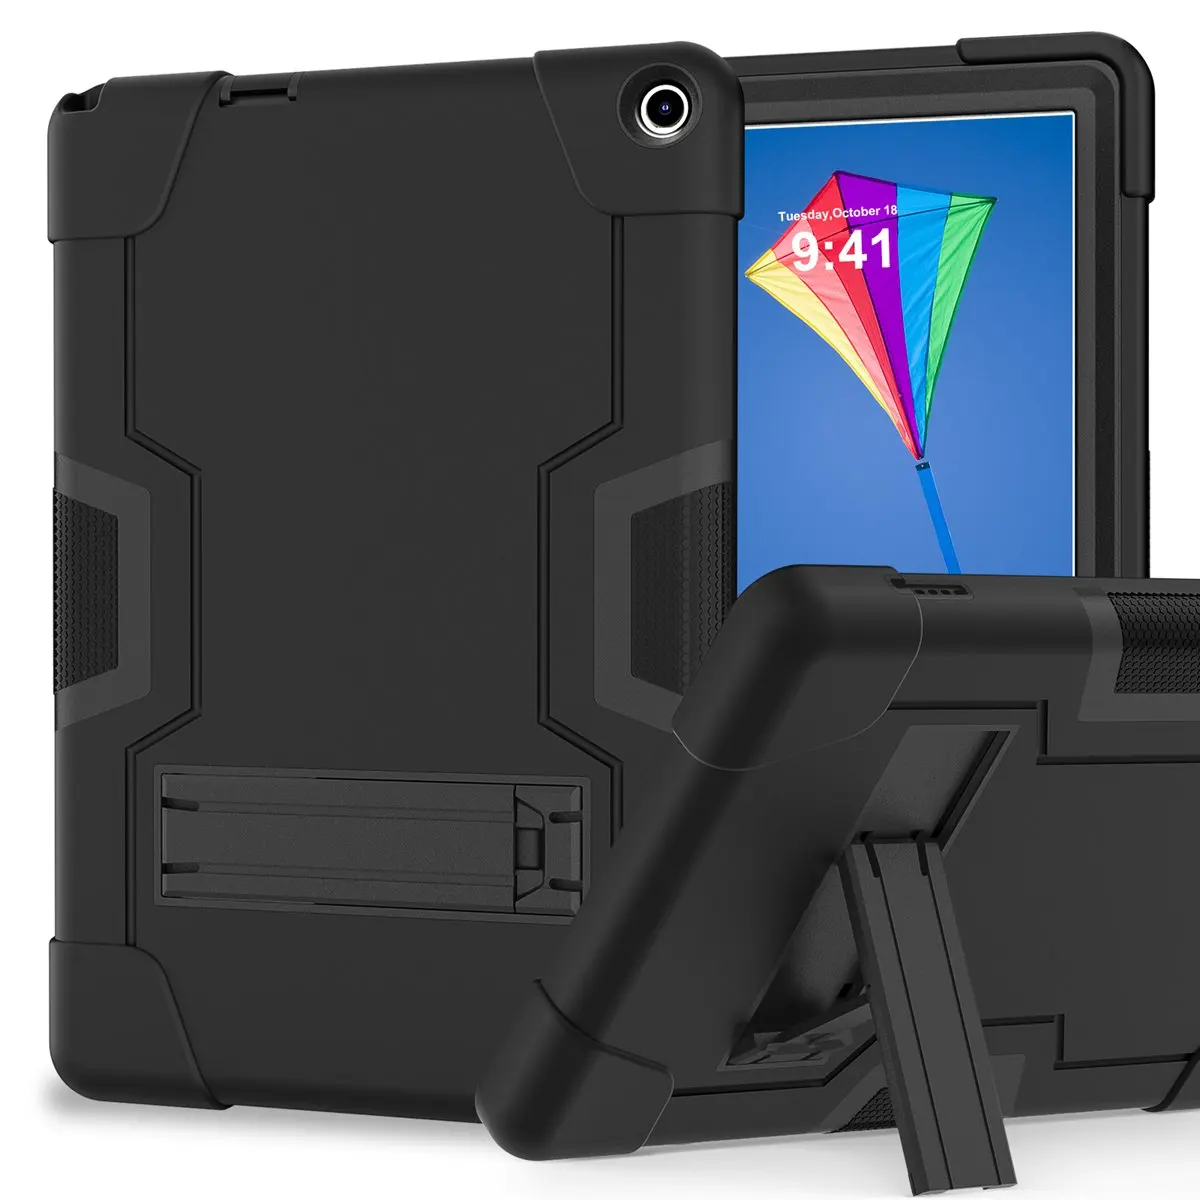 

Armor Shockproof Rugged Drop Protection Cover Case Built with Kickstand For Onn 10.1 inch Gen 3 (2022 Model:100071485) Tablet